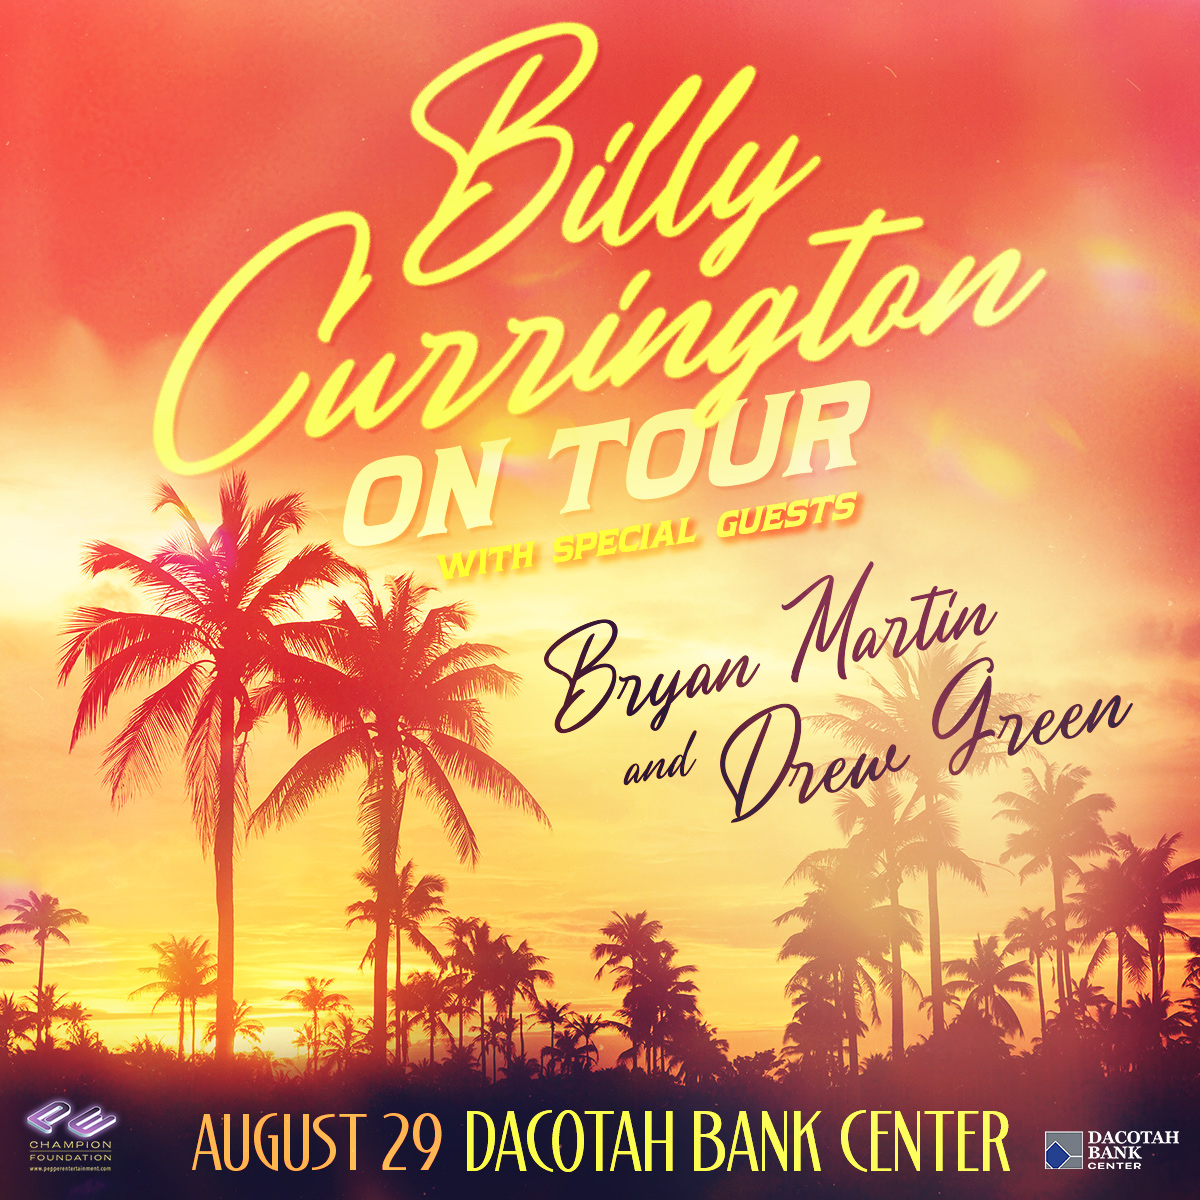 Tickets NOW on sale! 🔥ticketmaster.com/event/06006096…

#PepperPresents Billy Currington On Tour
With special guests: Bryan Martin and Drew Green
Dacotah Bank Center | August 29

#DacotahBankCenter #BillyCurrington #BryanMartin #DrewGreen #OVG